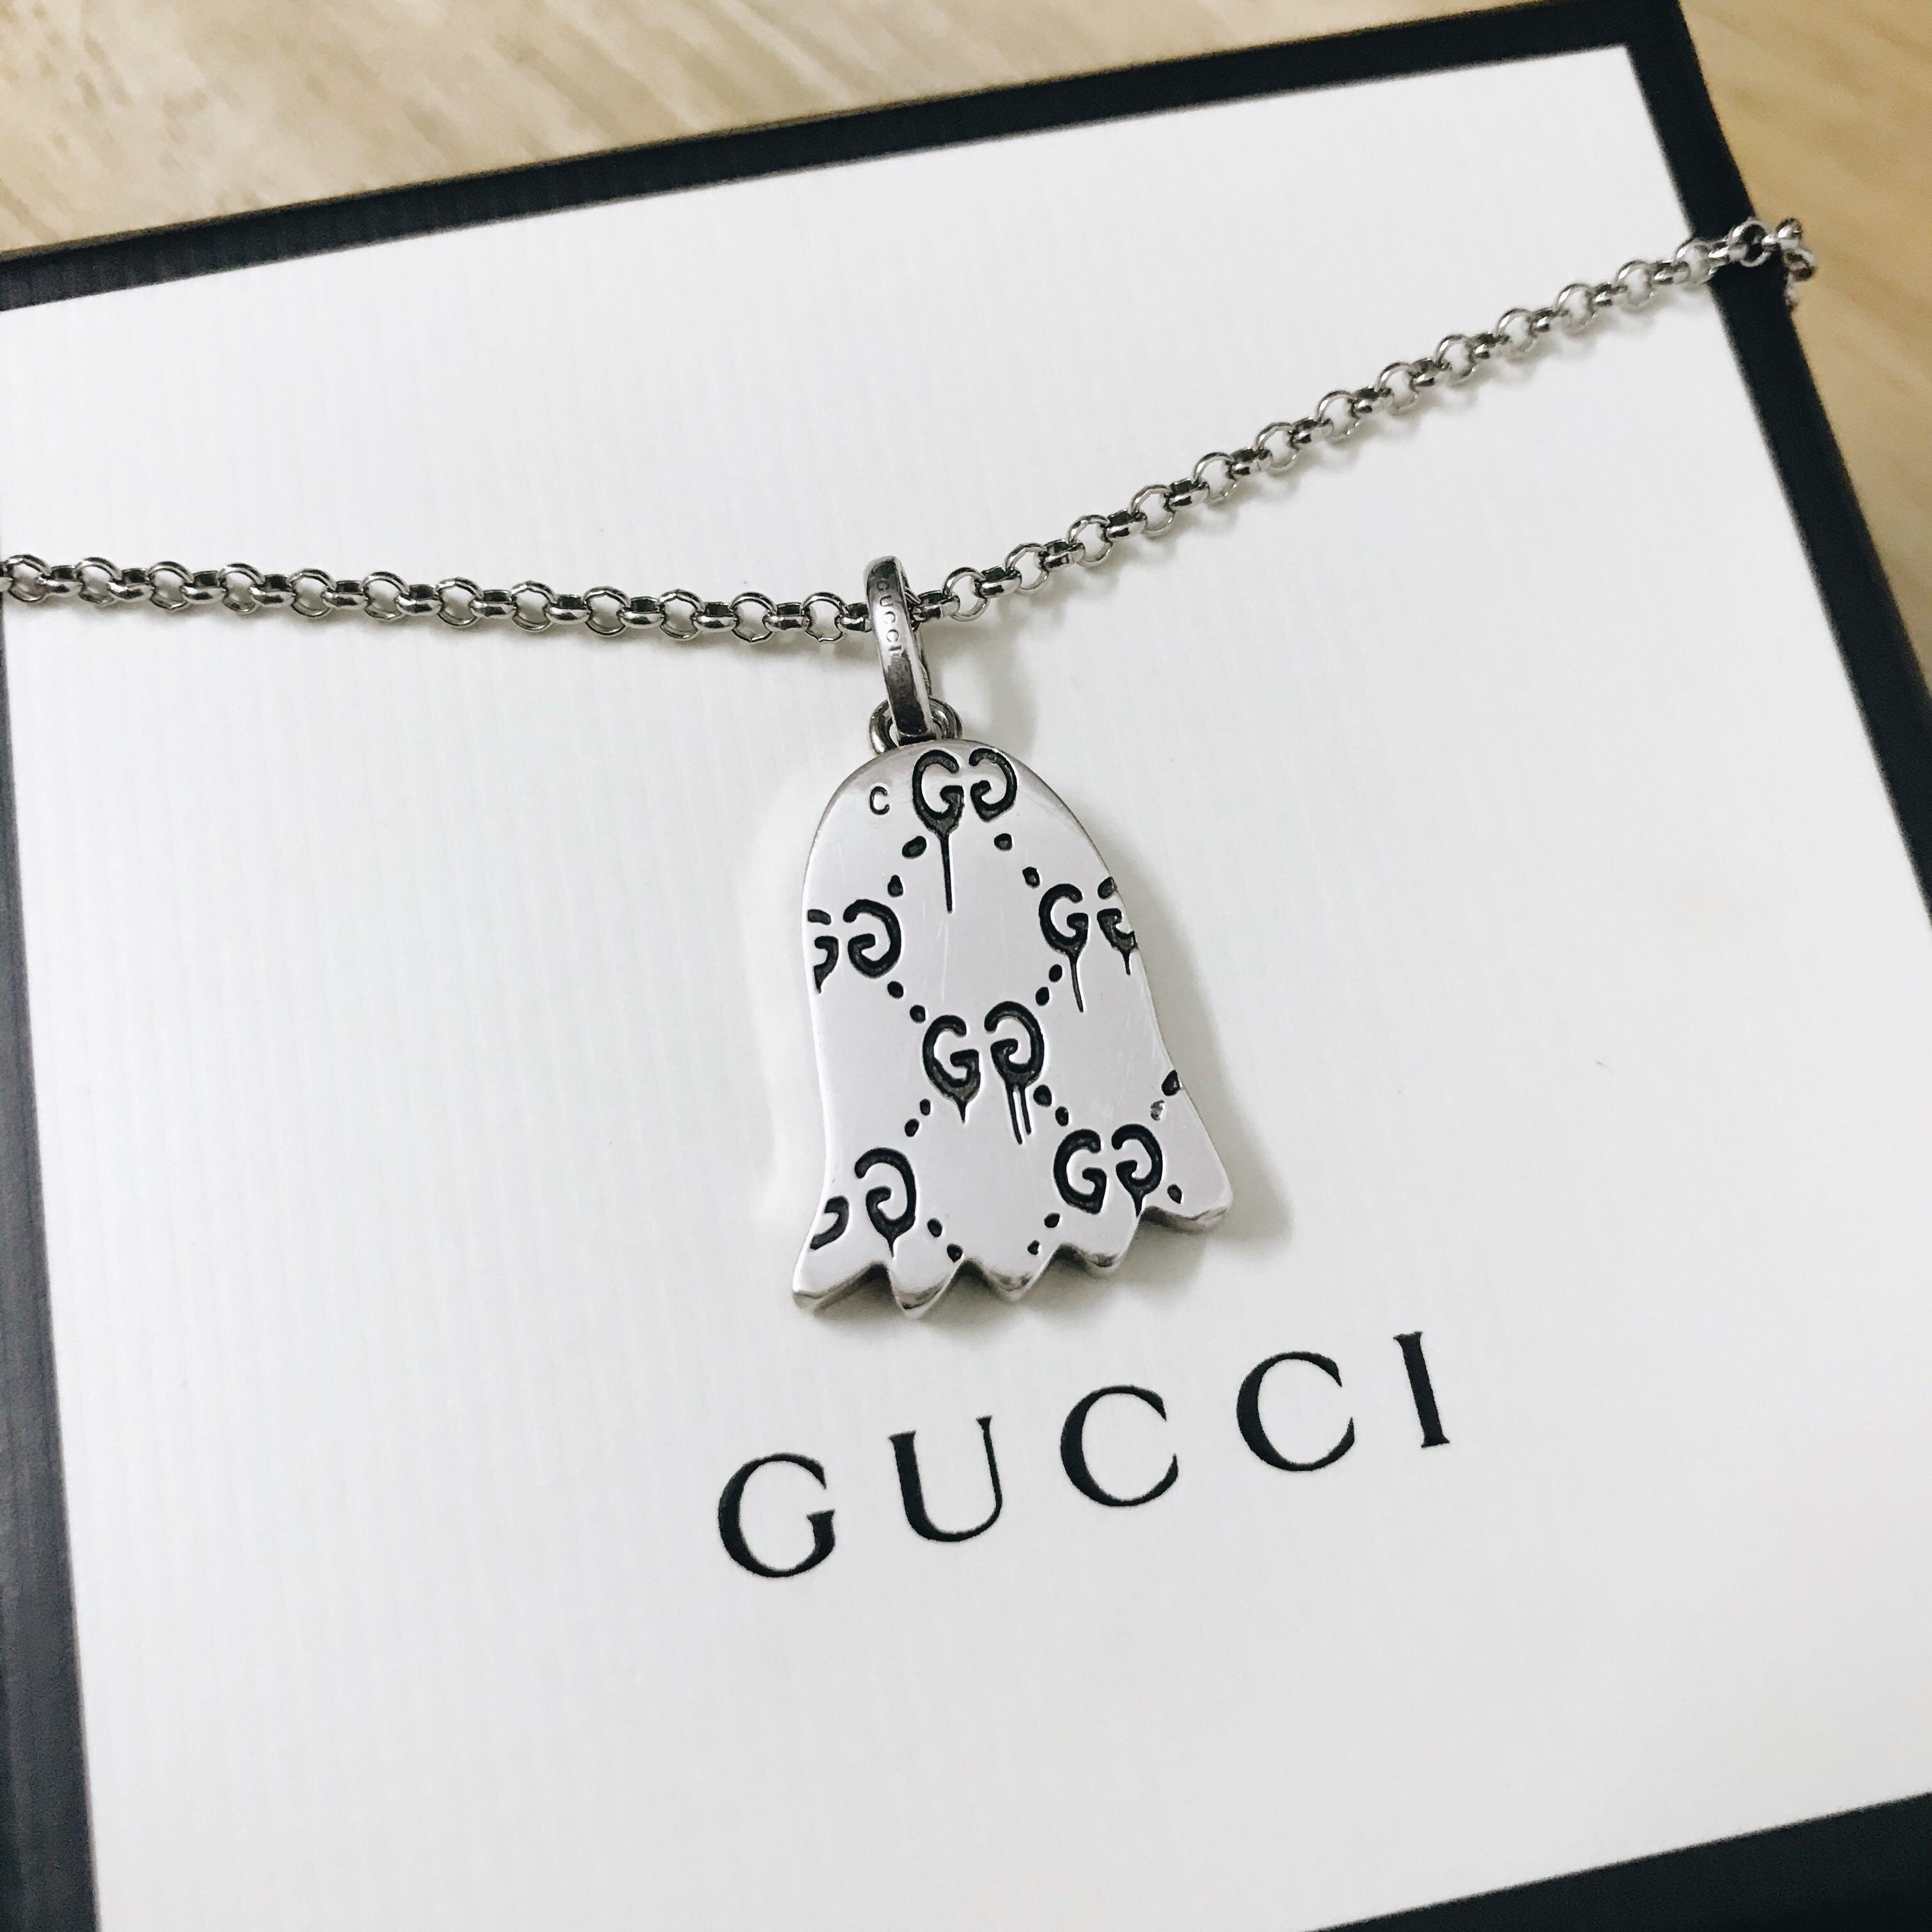 rare *GUCCI ghost ghost necklace #0135s132: Real Yahoo auction salling